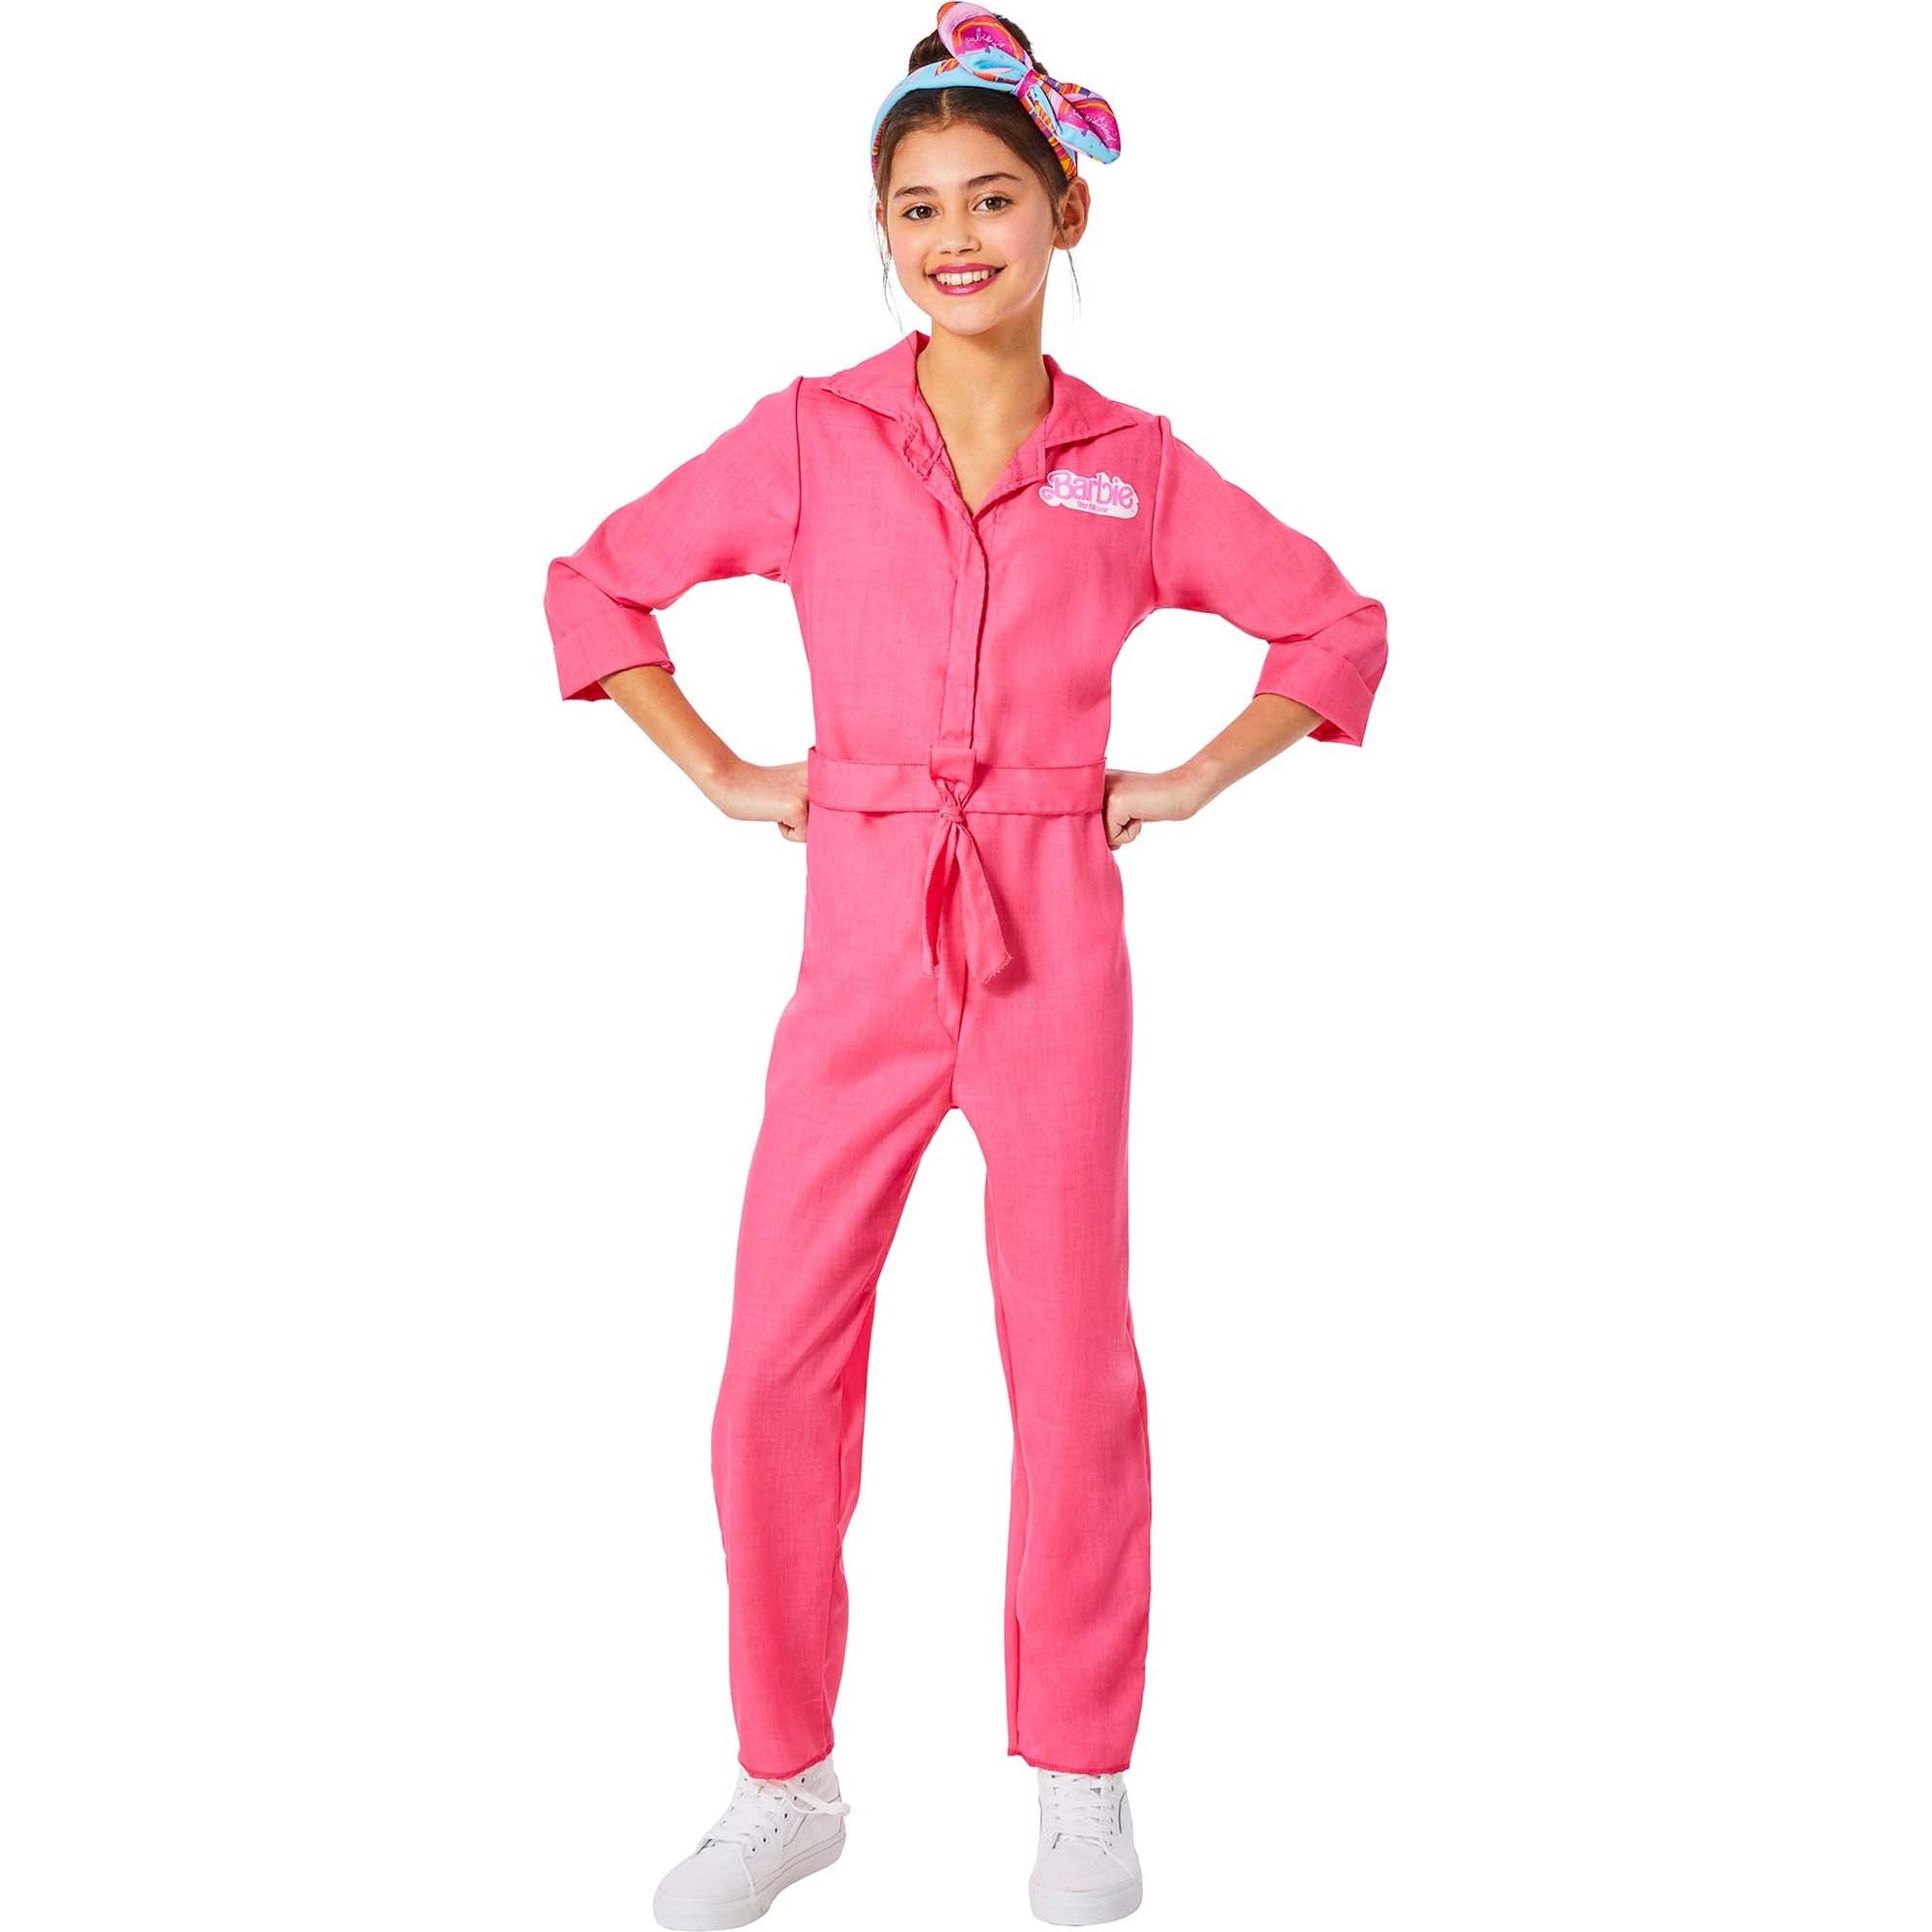 Barbie Pink Utility Jumpsuit Costume for Kids